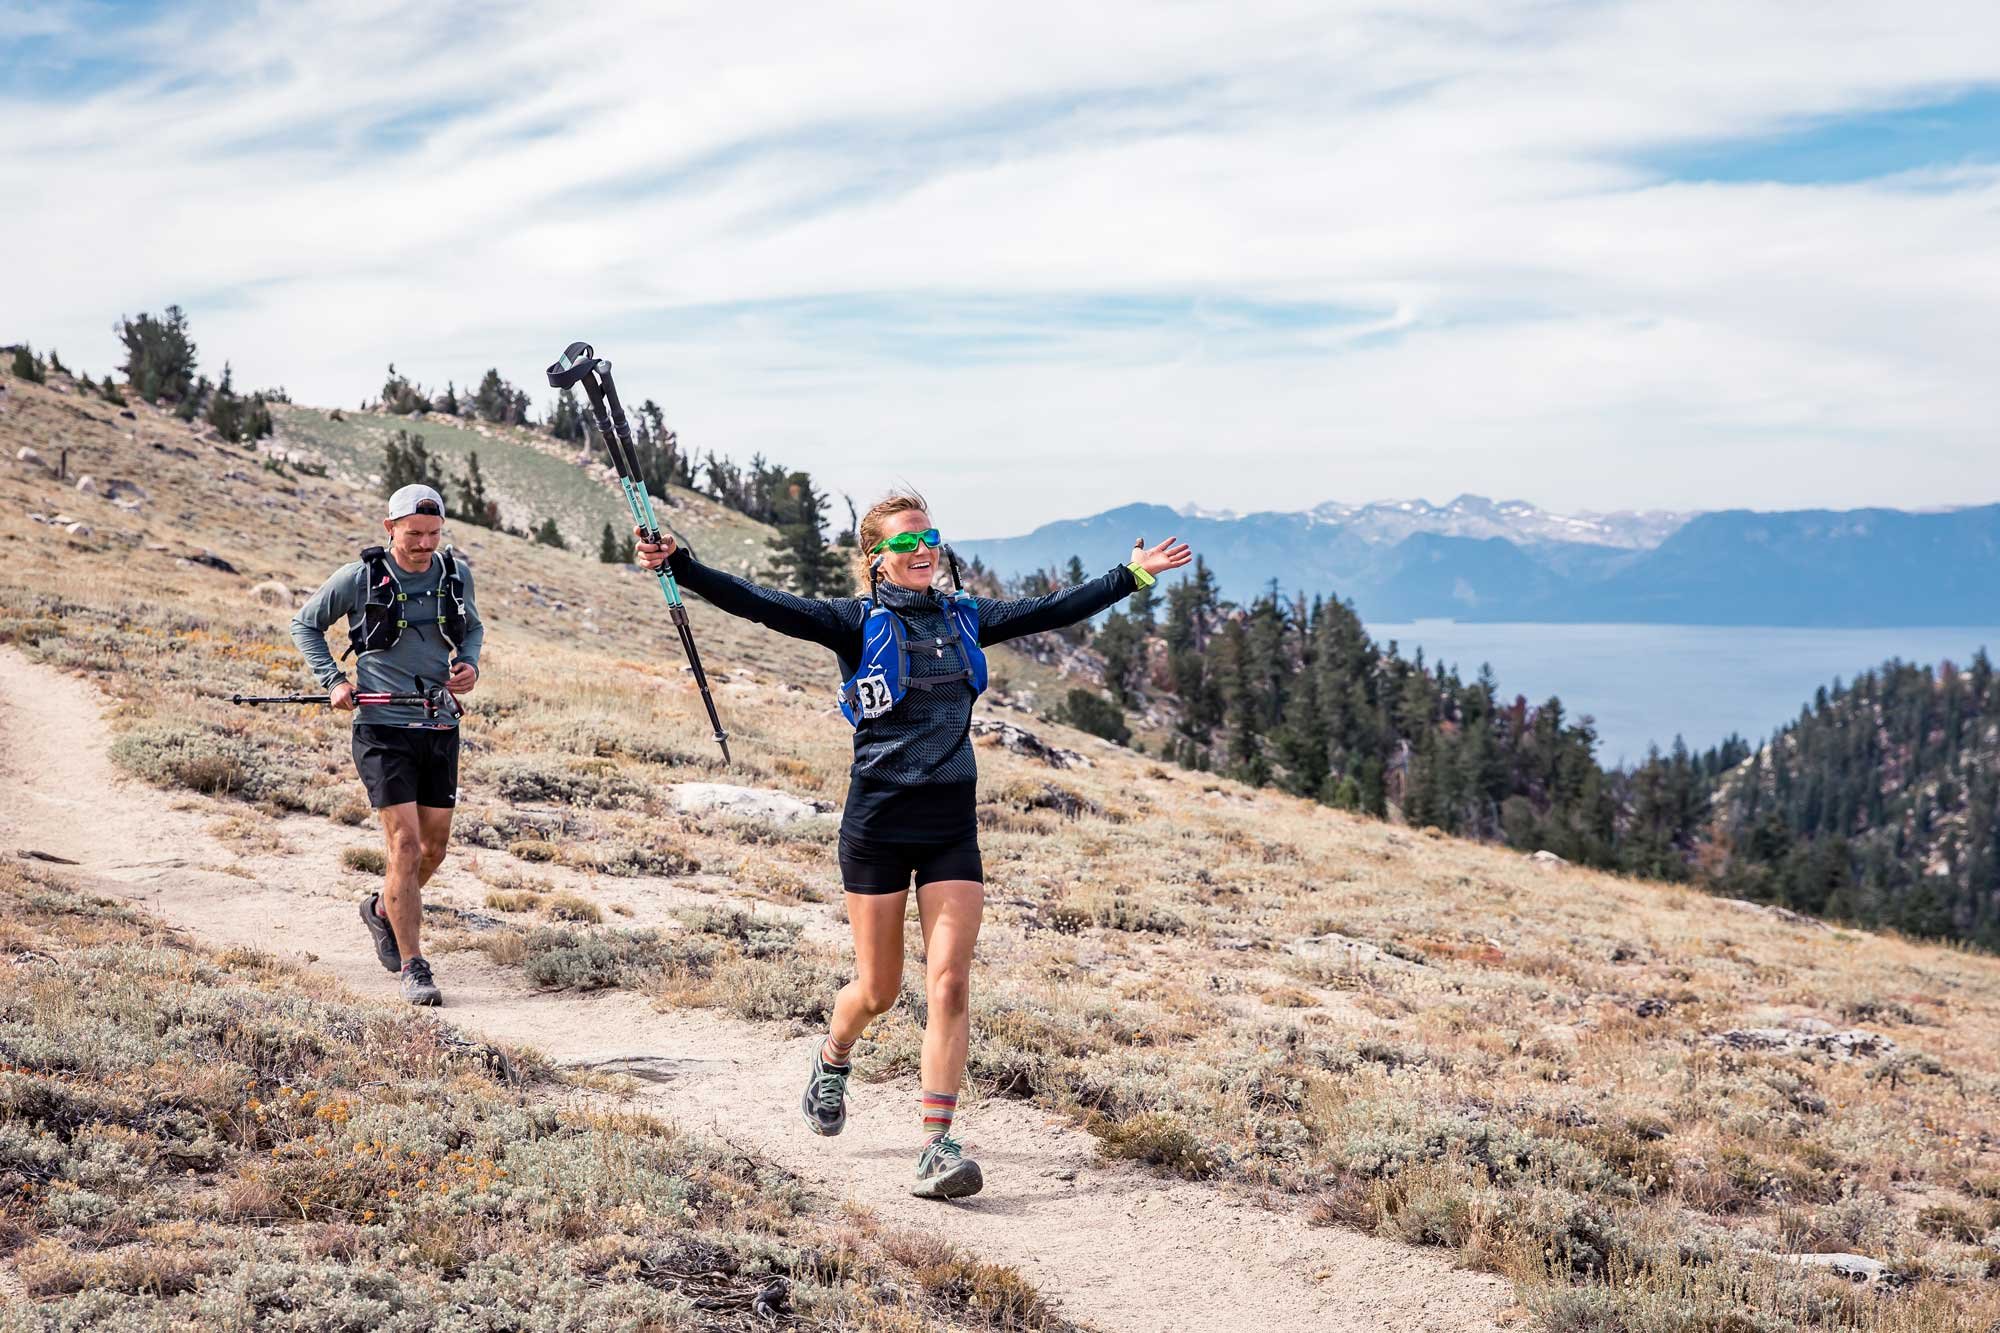  A male and female runner at Tahoe 200 running through Snow Valley  having fun 